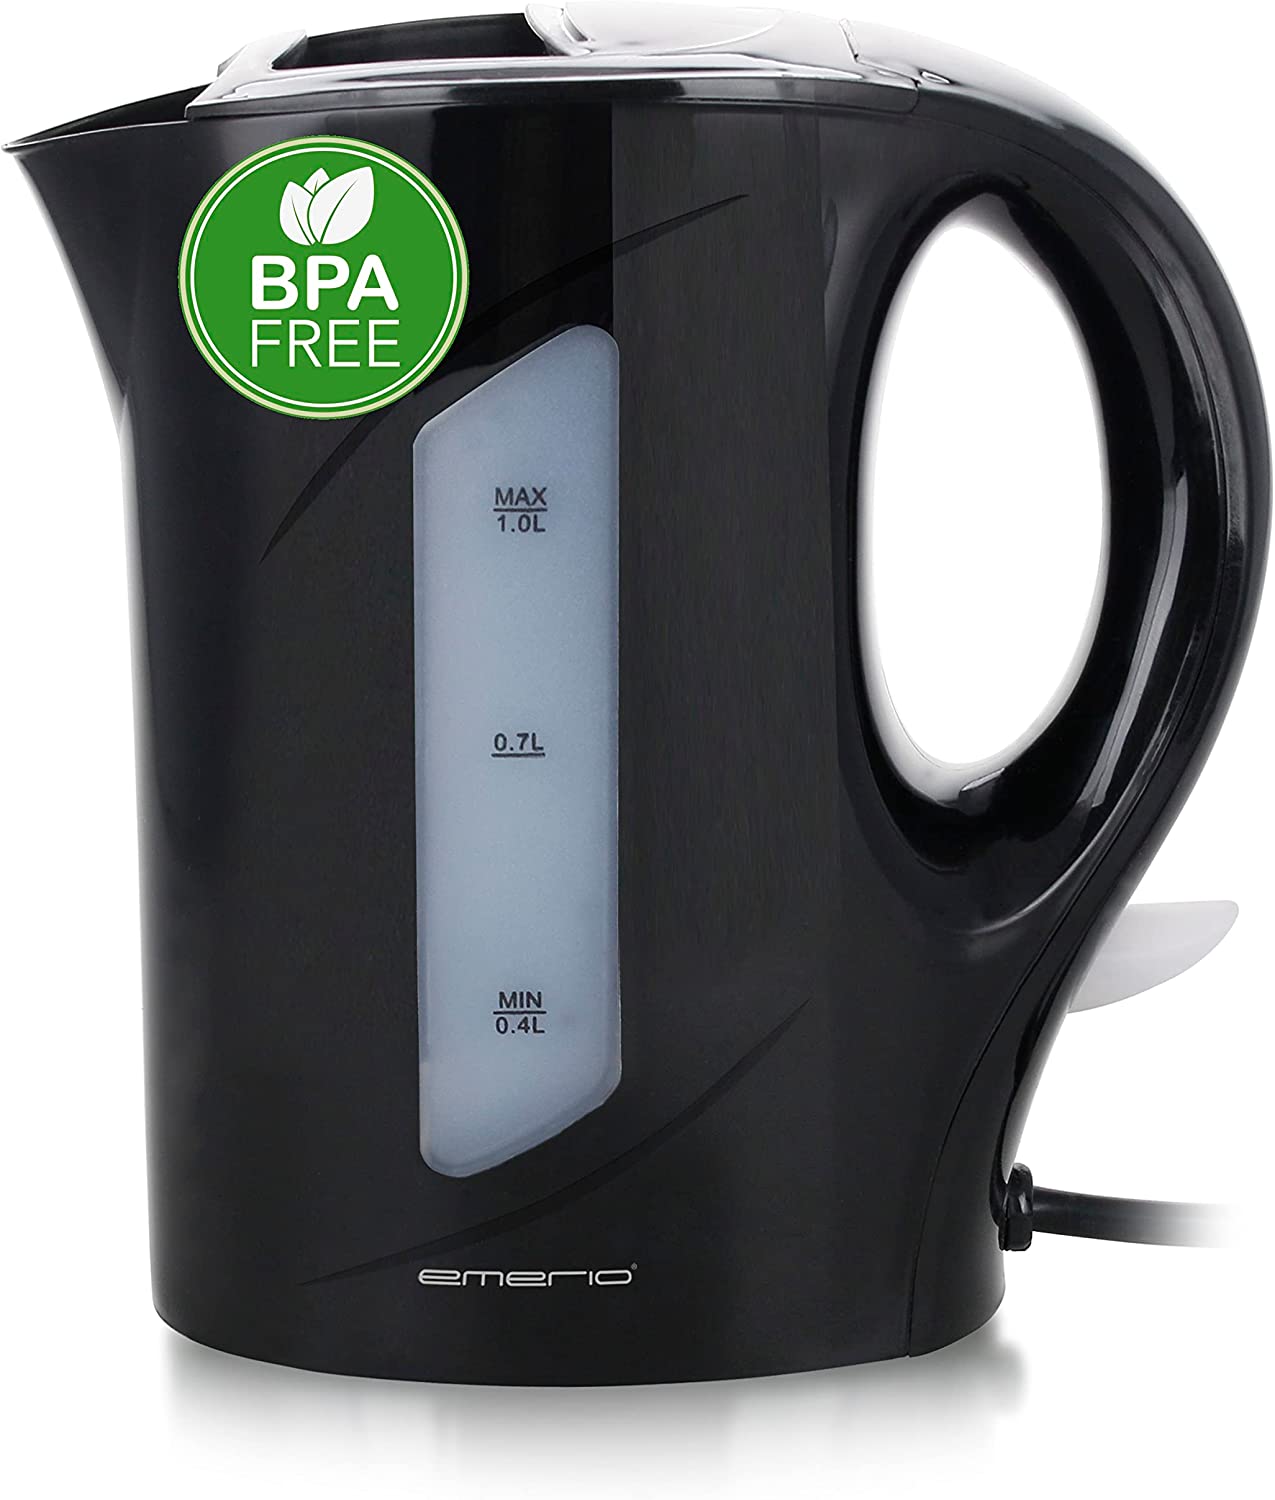 Emerio Kettle, 1.0 Litre, 900 Watt, Water Level Indicator, BPA Free, Boil Dry Protection, Illuminated On/Off Switch, Ideal for Home, Camping or Office, WK-121616.1, Black